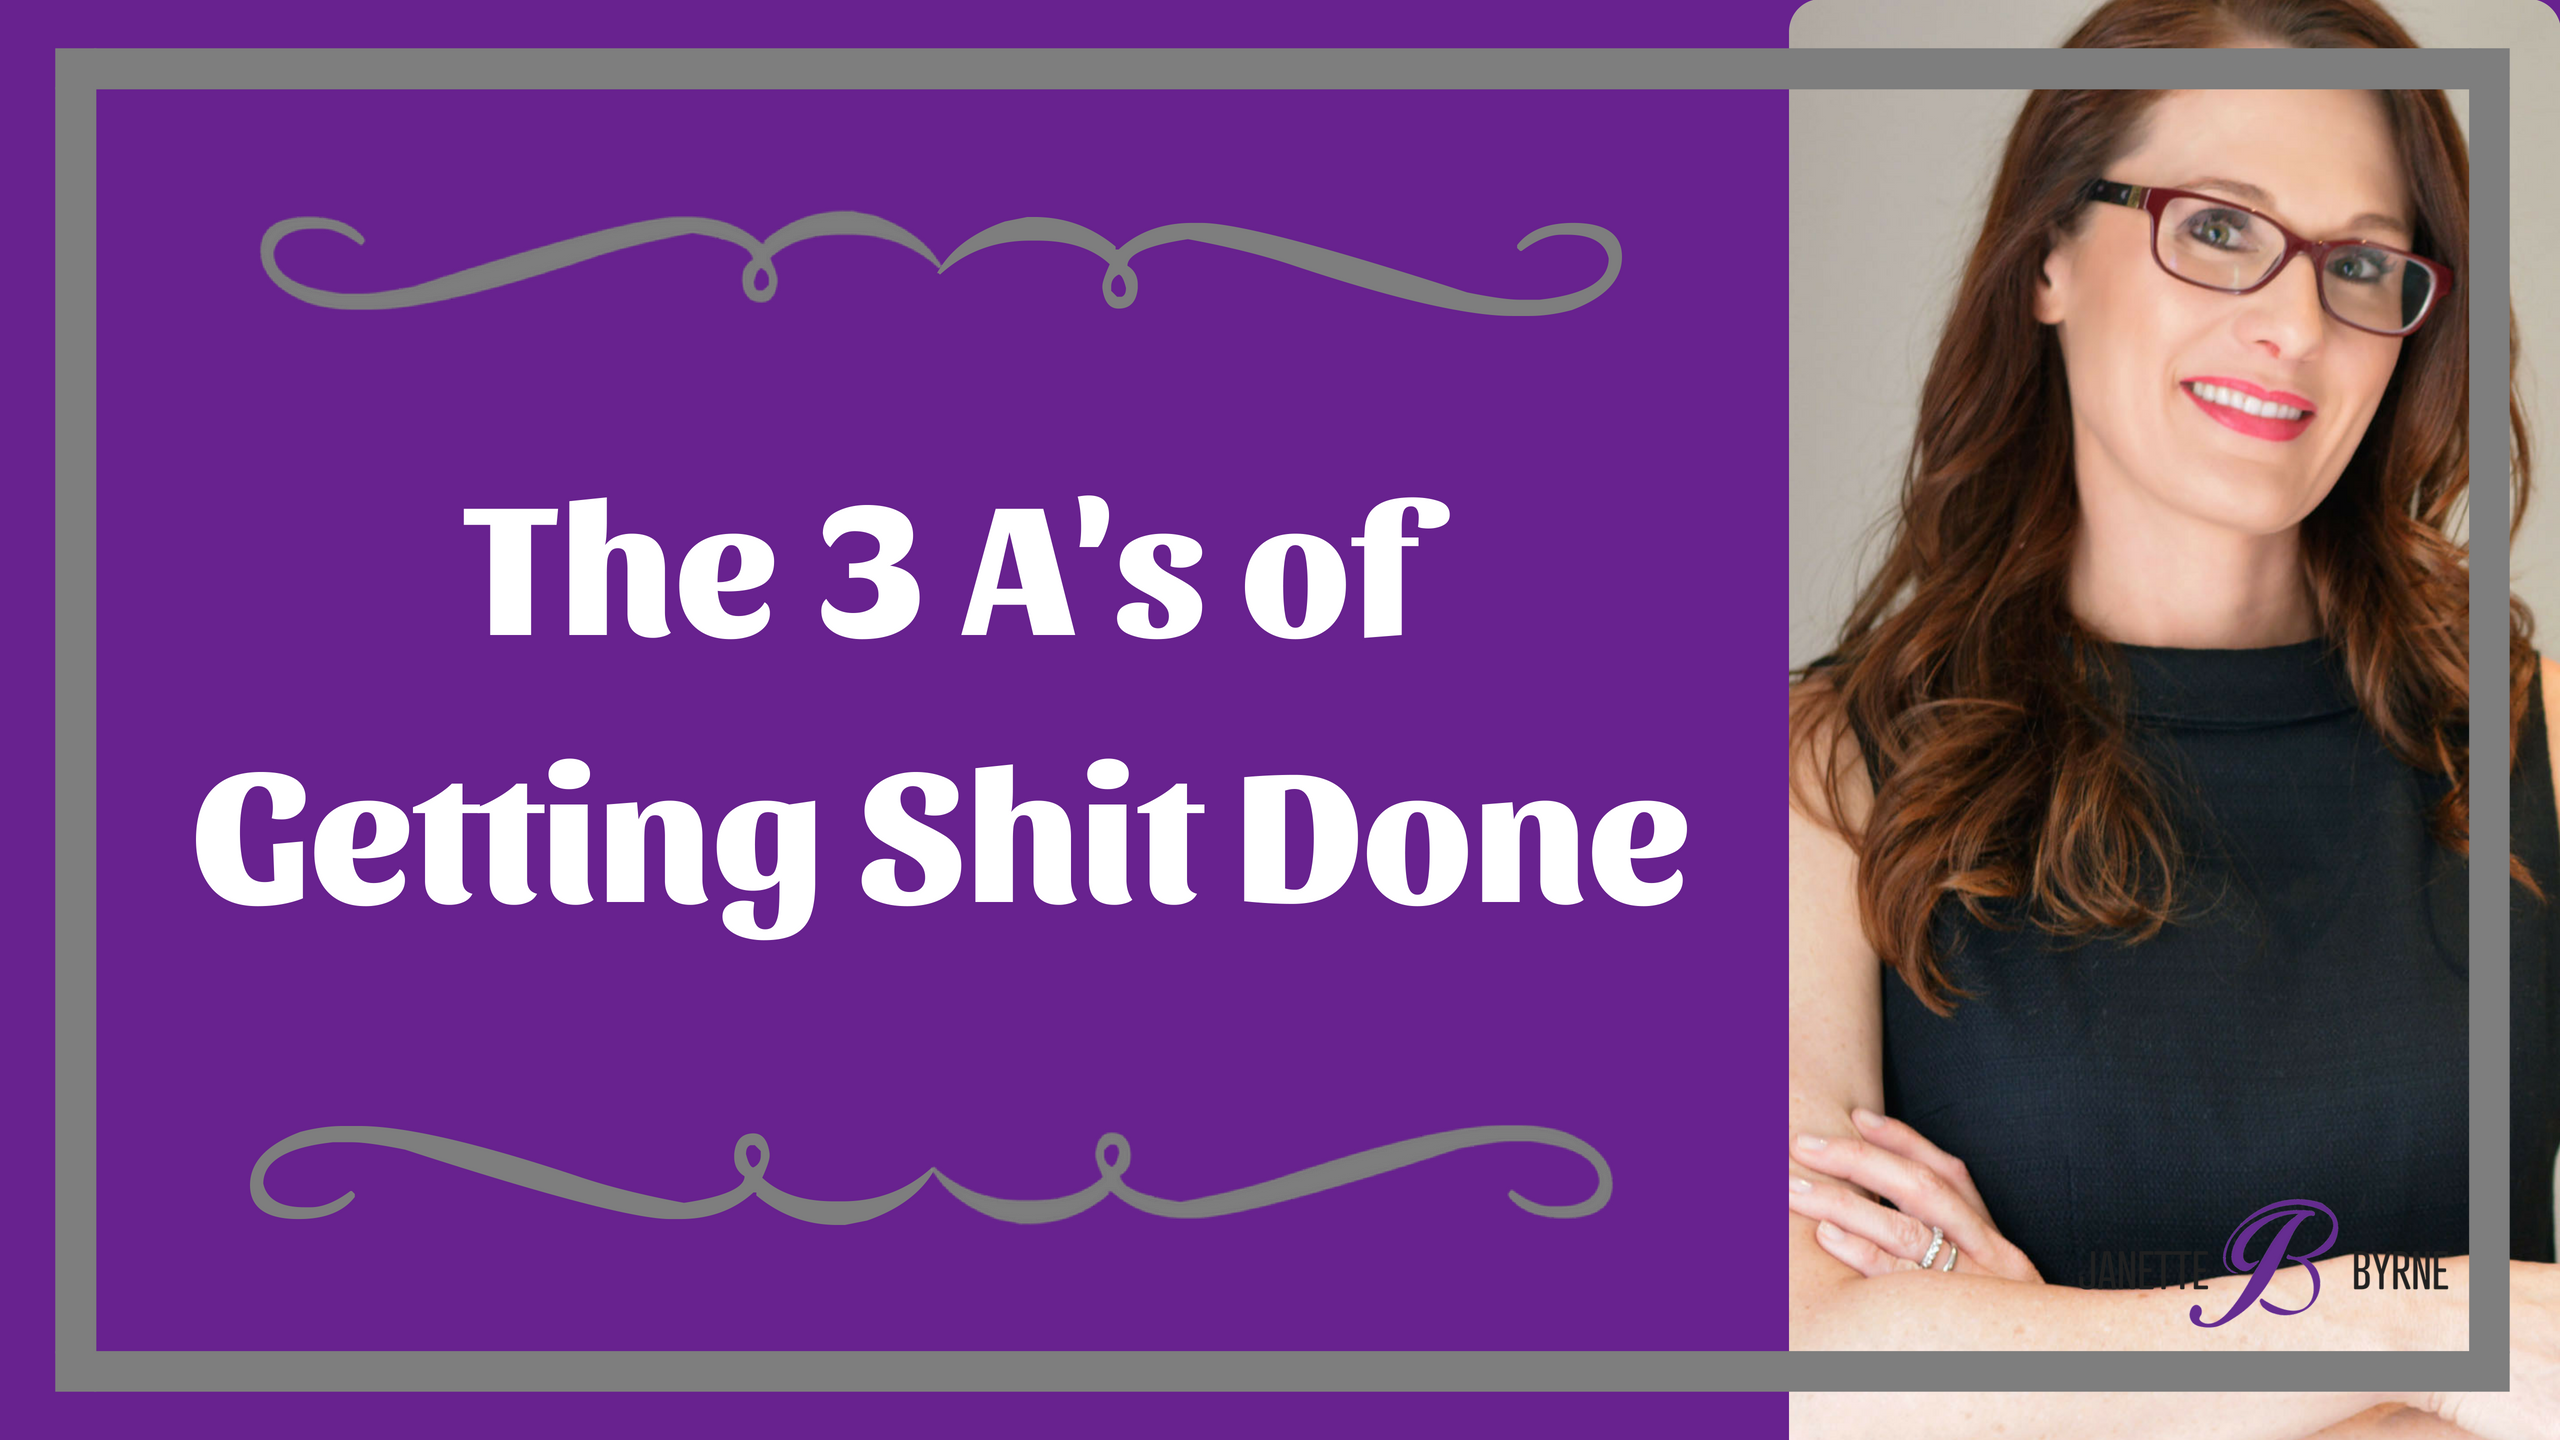 The 3 A’s Of Getting Shit Done